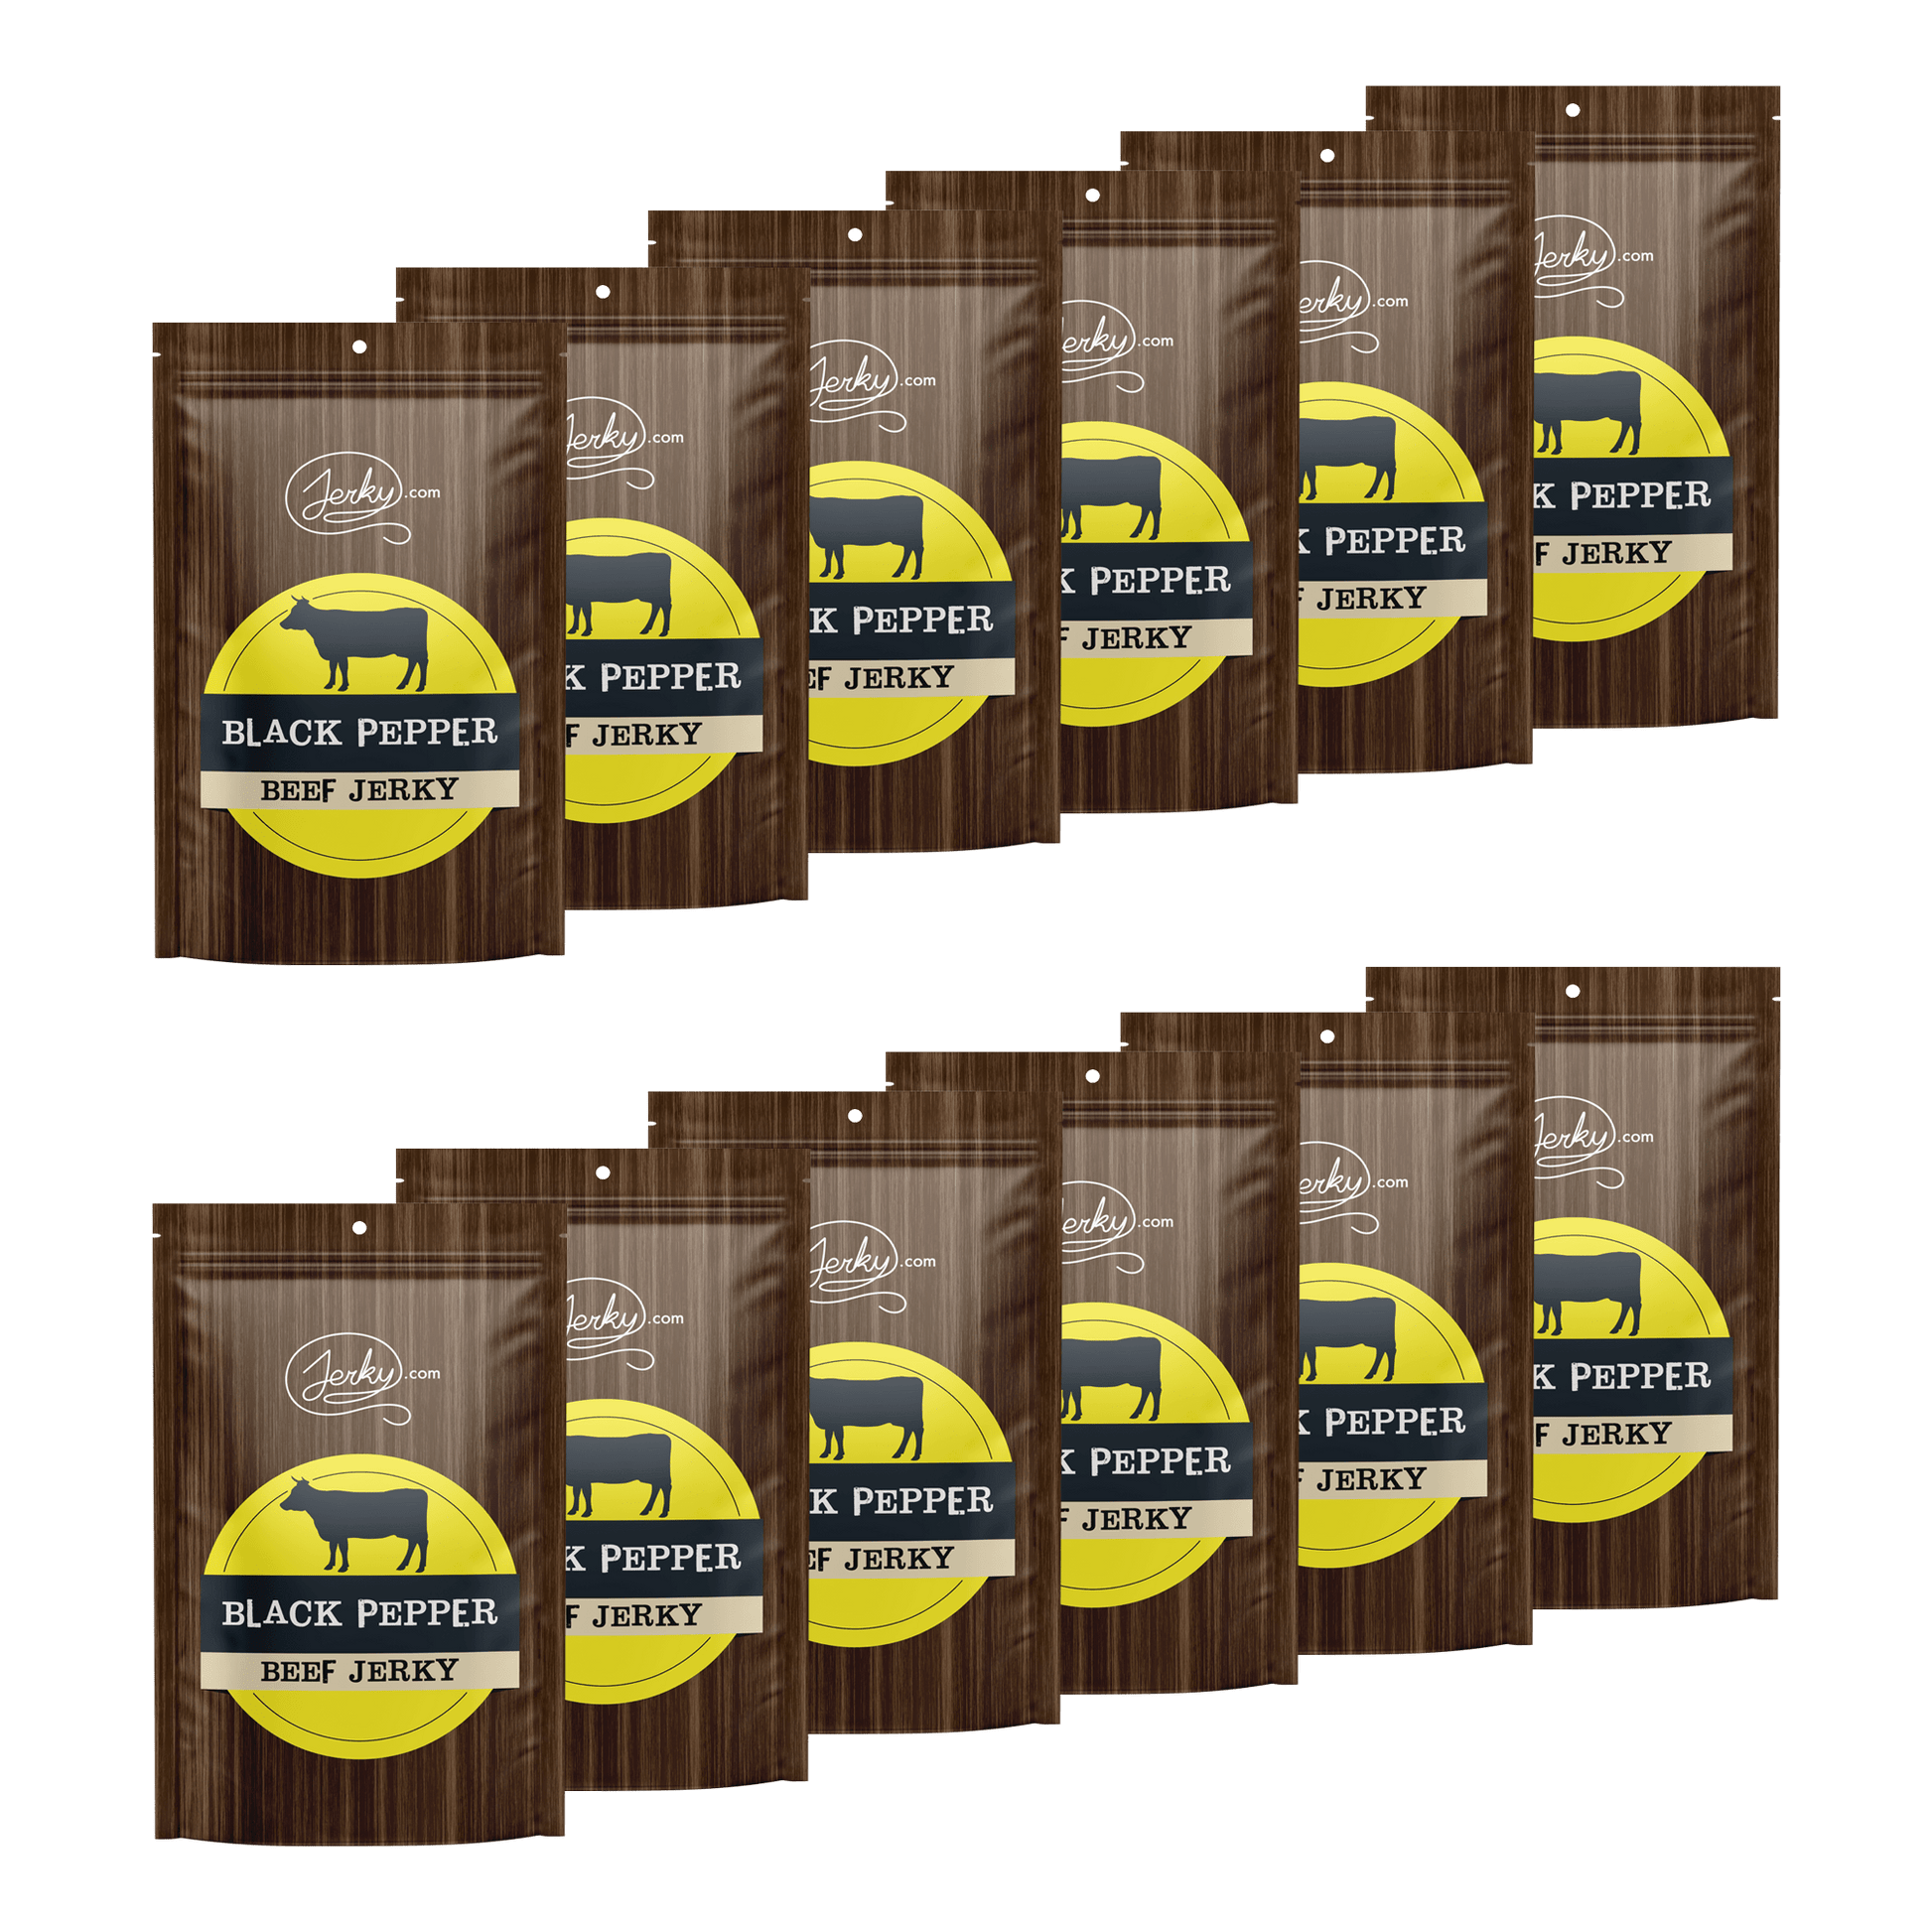 All-Natural Beef Jerky - Black Pepper by Jerky.com